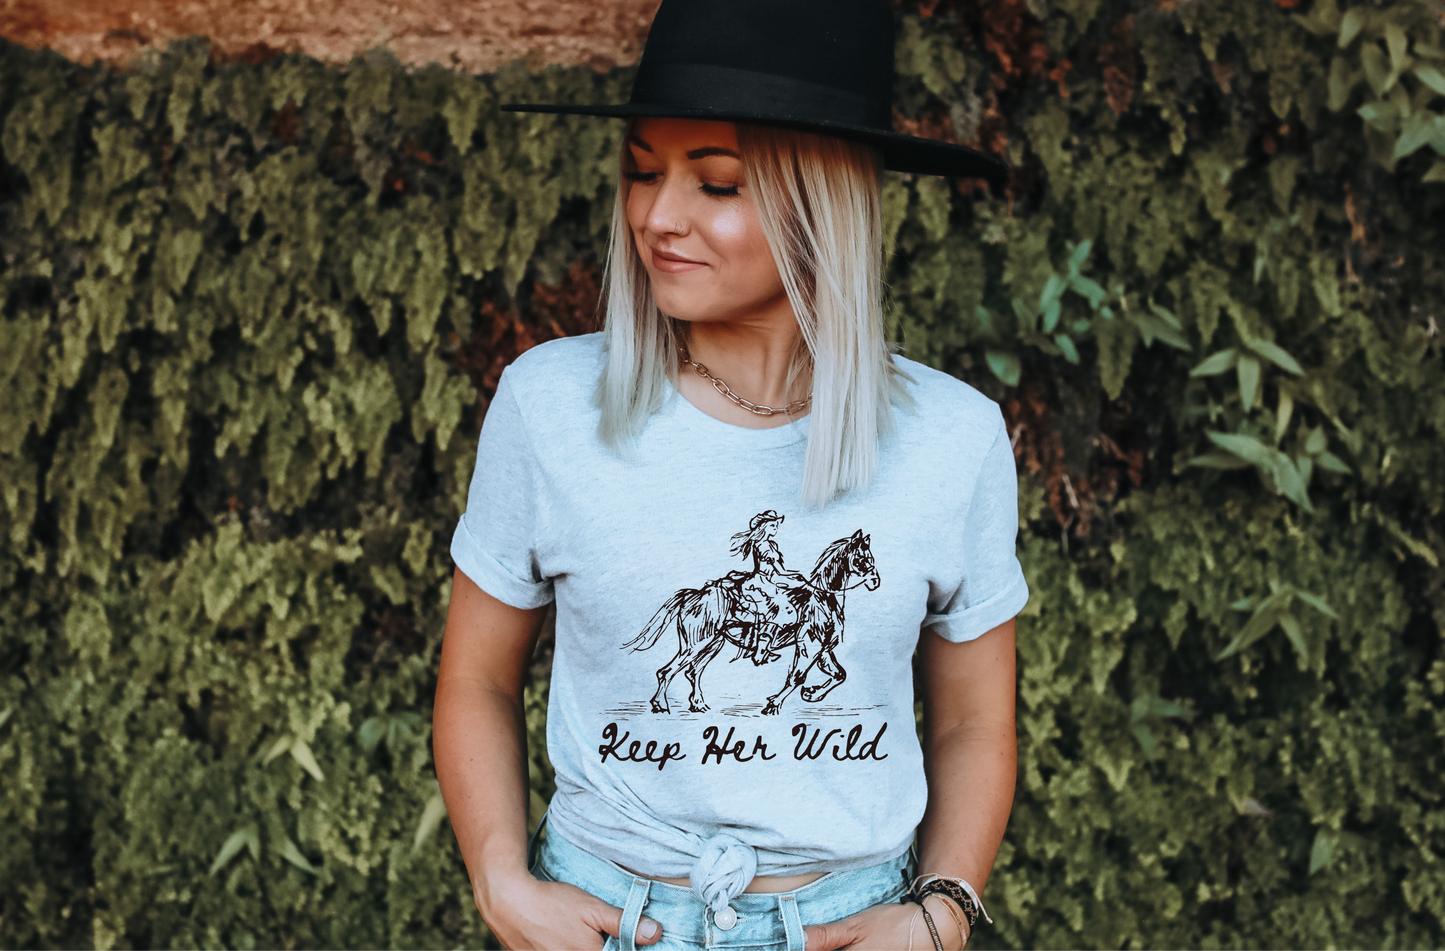 Womens Western Shirt, Western T-short, Cowgirl, Cowgirls Tee, Country Music, Rodeo, Punchy Shirt, Country Western Shirt